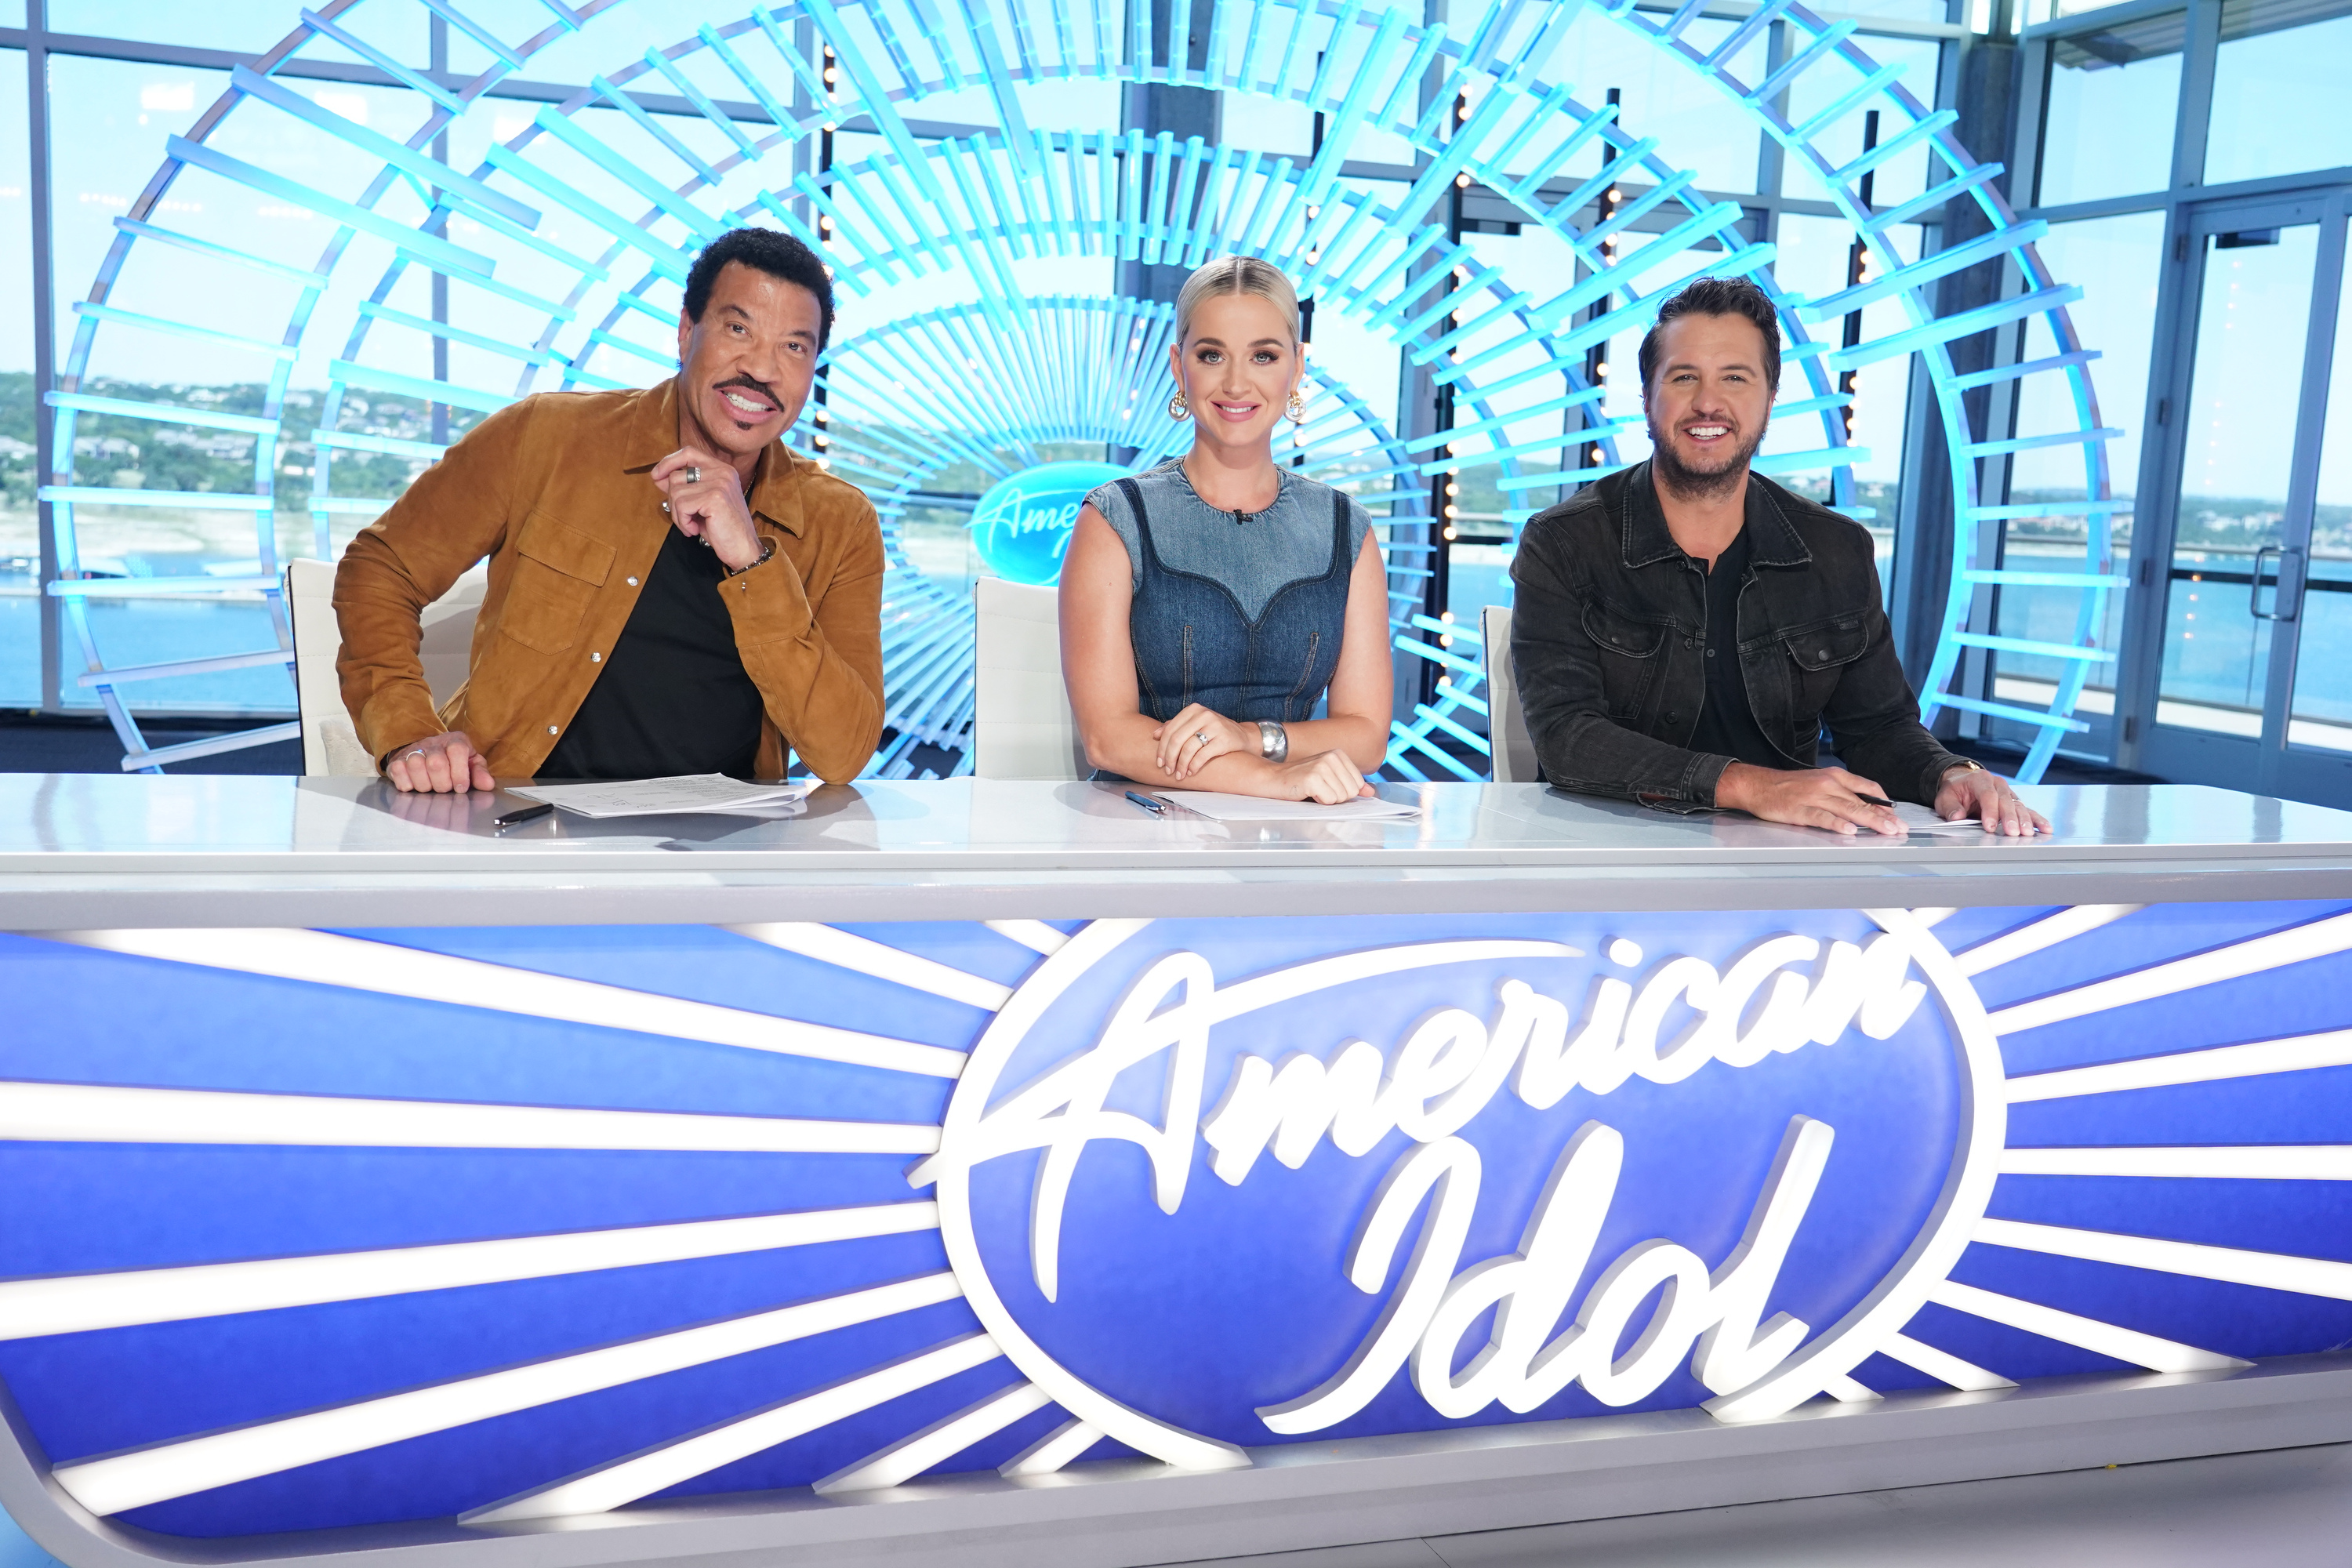 Lionel Richie, Katy Perry, and Luke Bryan sitting at their judging table on 'American Idol'